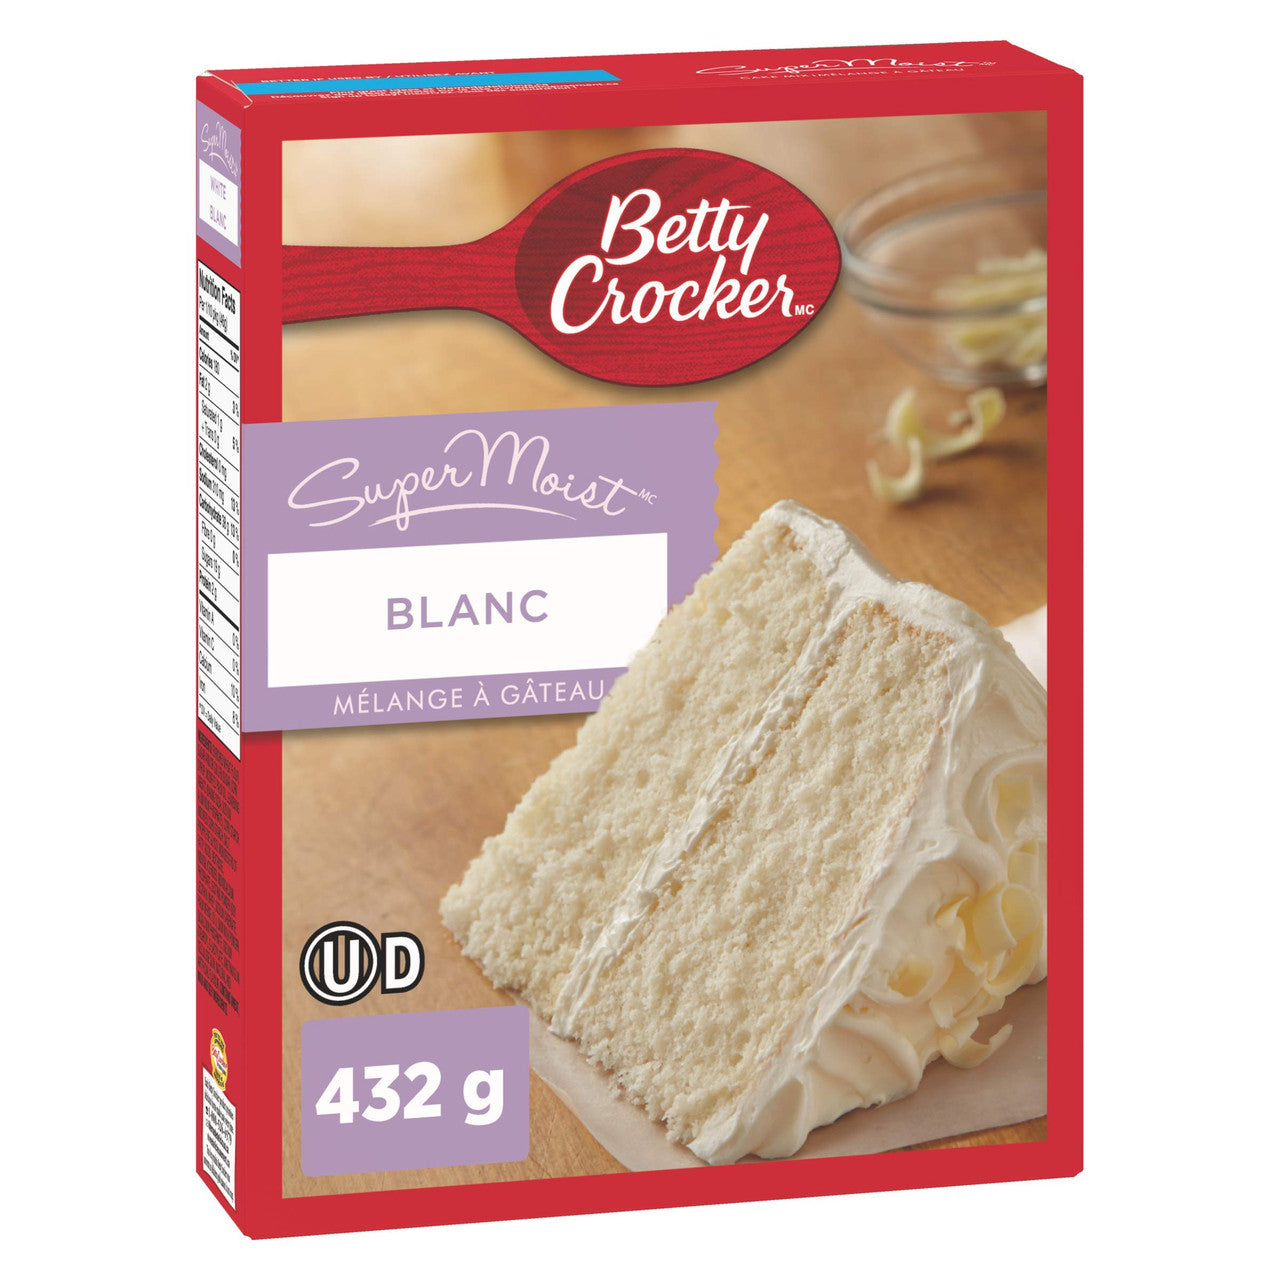 Betty Crocker, SuperMoist White Cake Mix, 461g/16.3oz., {Imported from Canada}